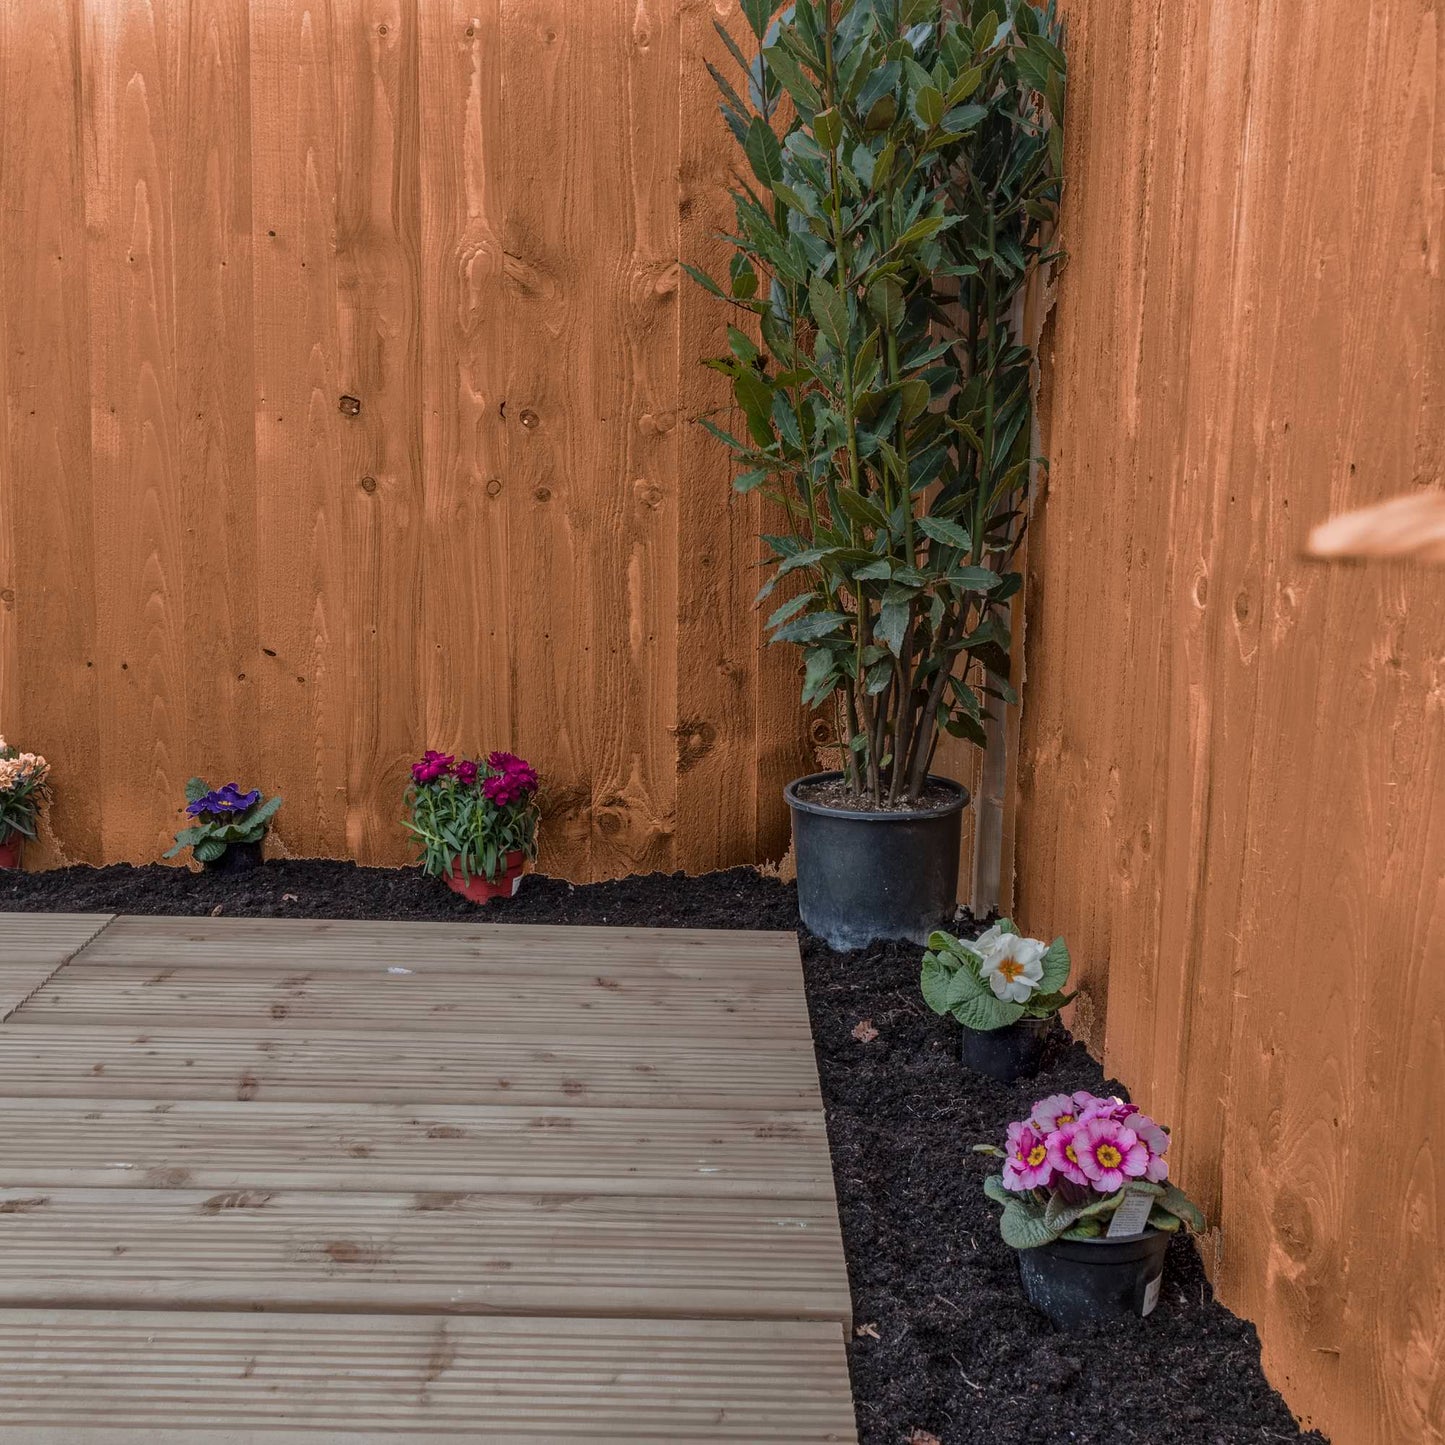 3 x 6 Pressure Treated Feather Edge Fence Panel